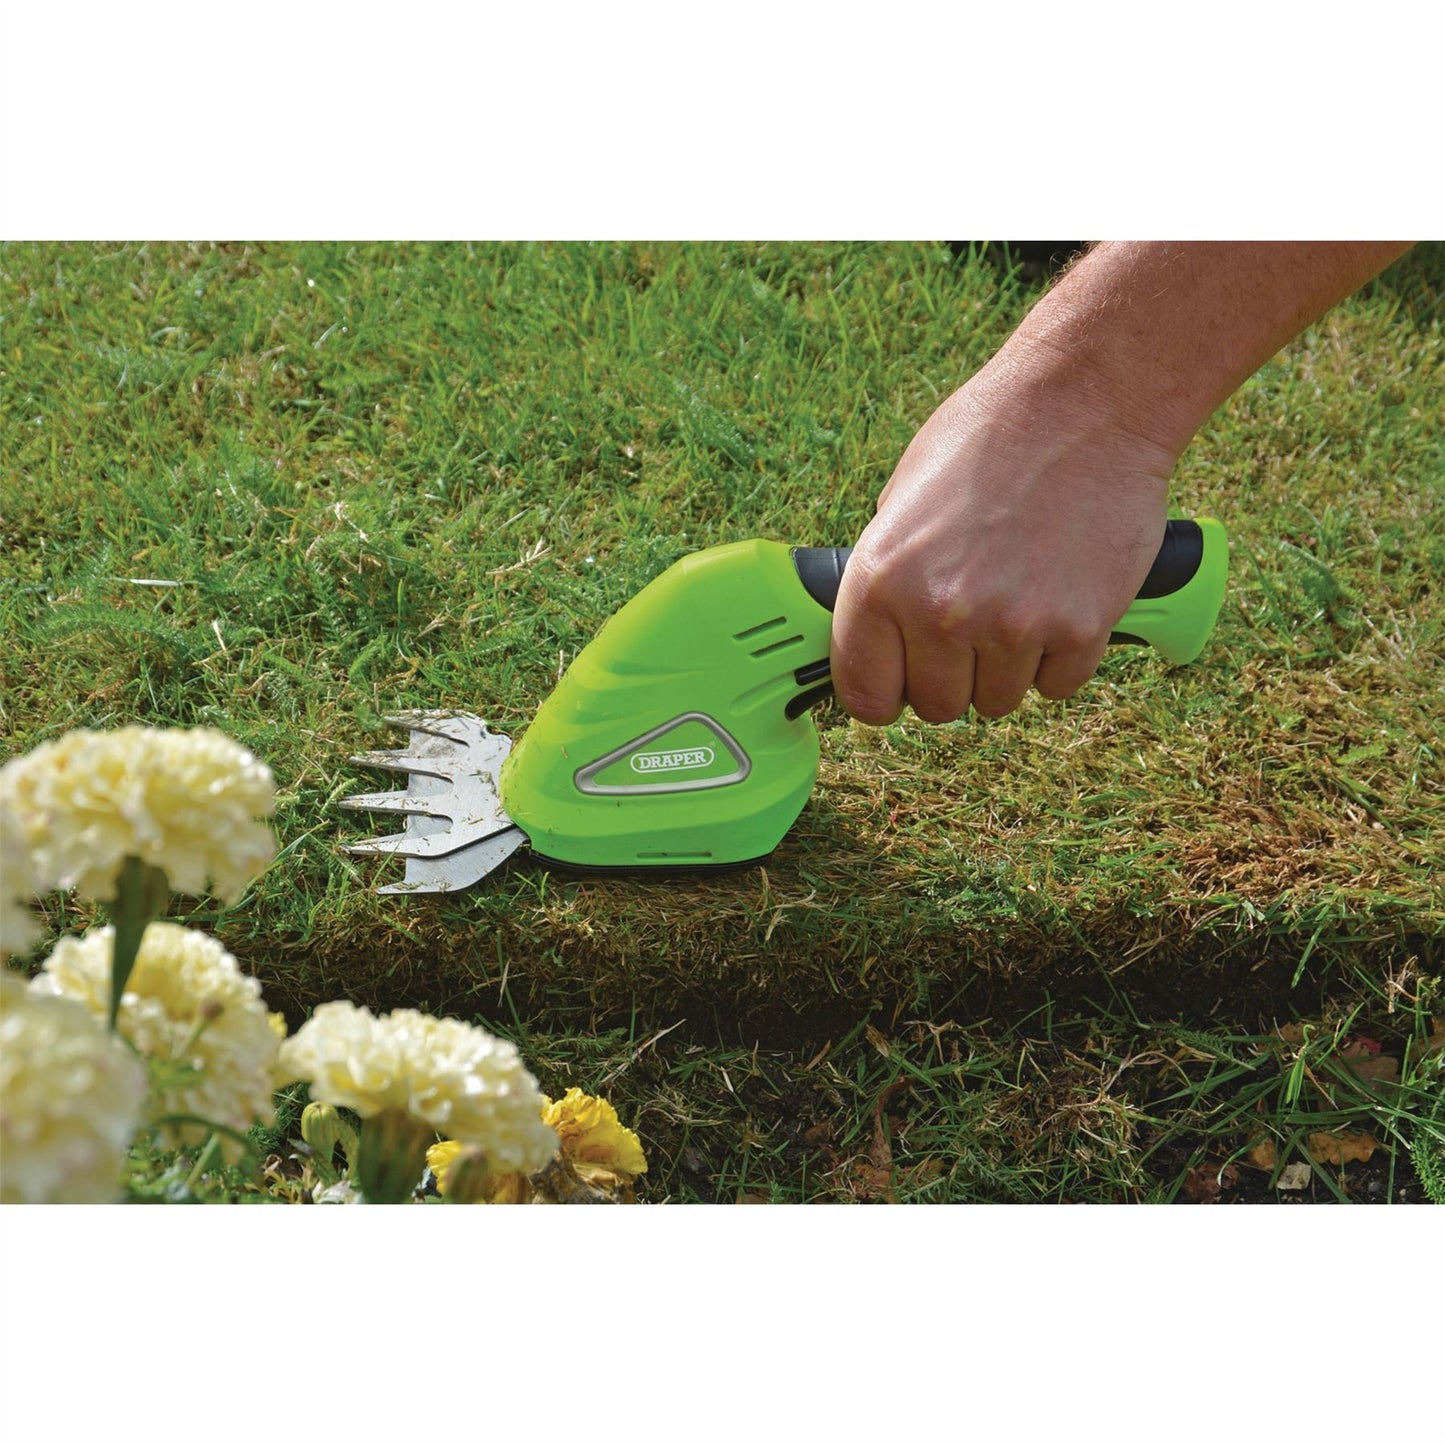 Draper 7.2v Lithium-Ion Cordless Battery Grass Lawn & Hedge Shear Trimmer, 53216